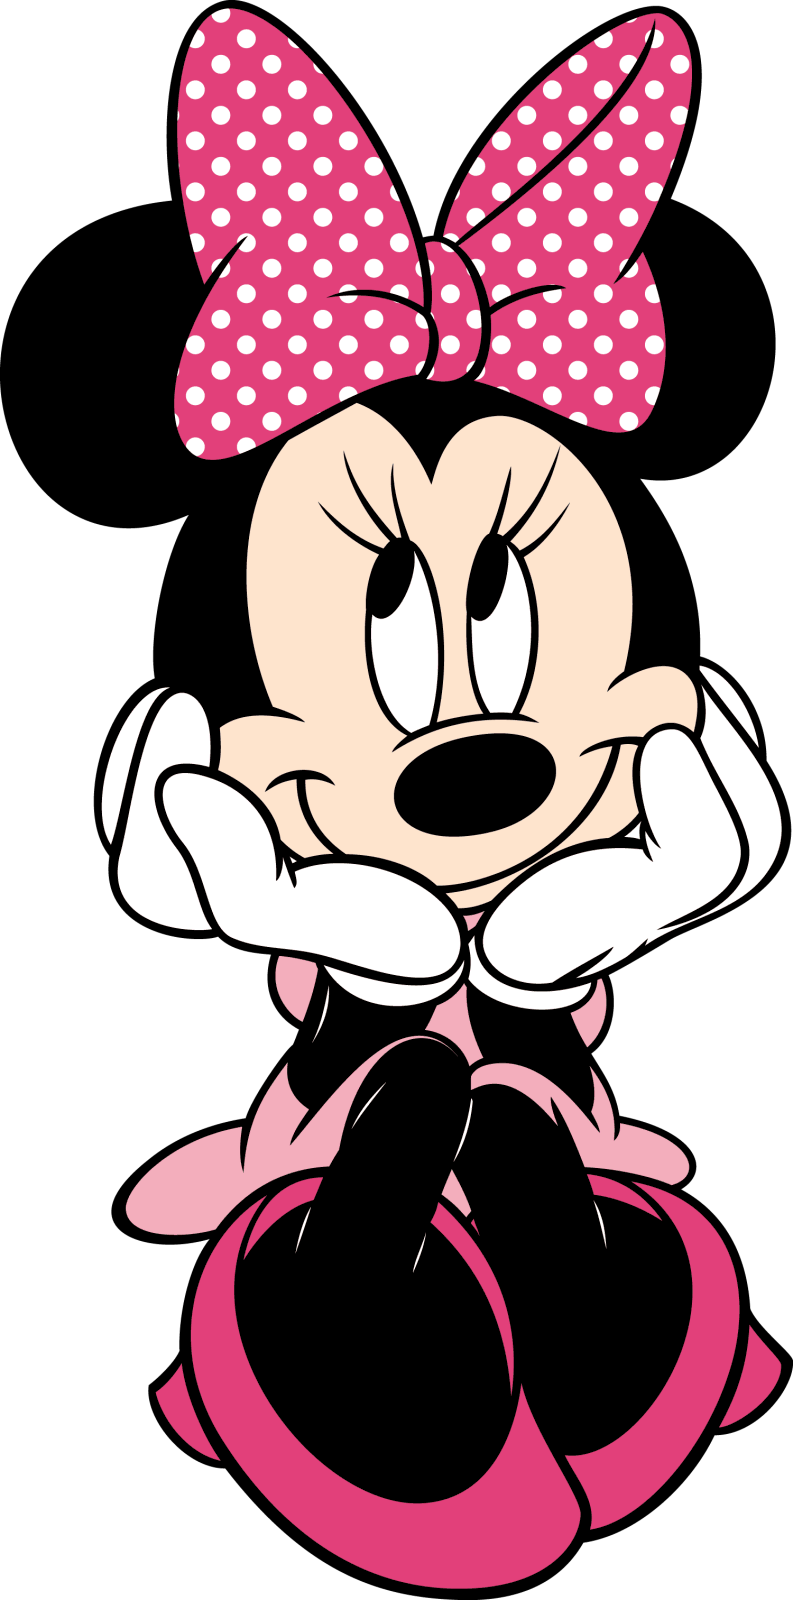 Pin by shelly rowell. Number 2 clipart minnie mouse